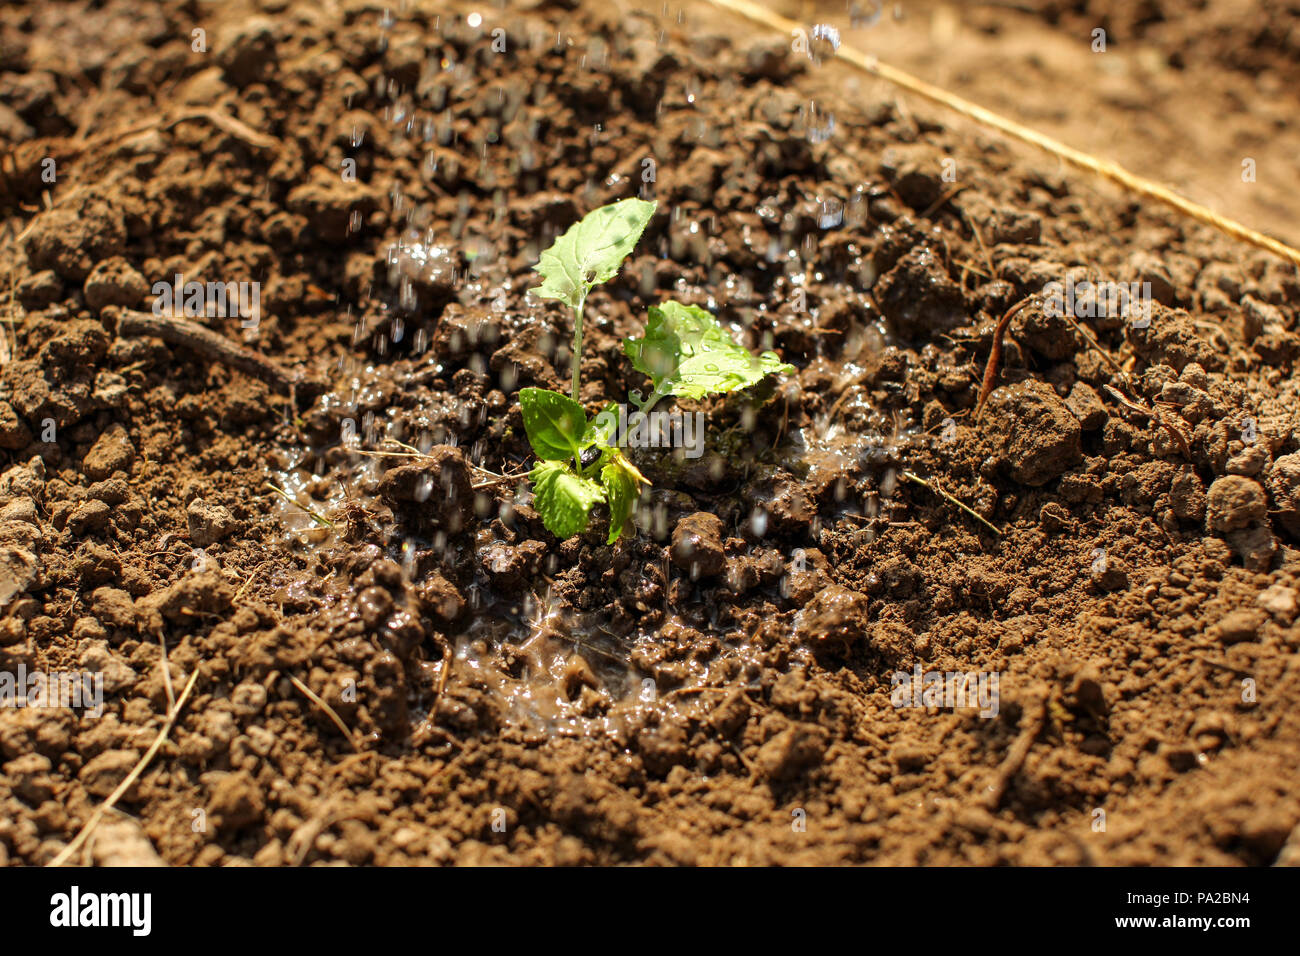 Young green seedling just planted in wet soil being watered. Stock Photo